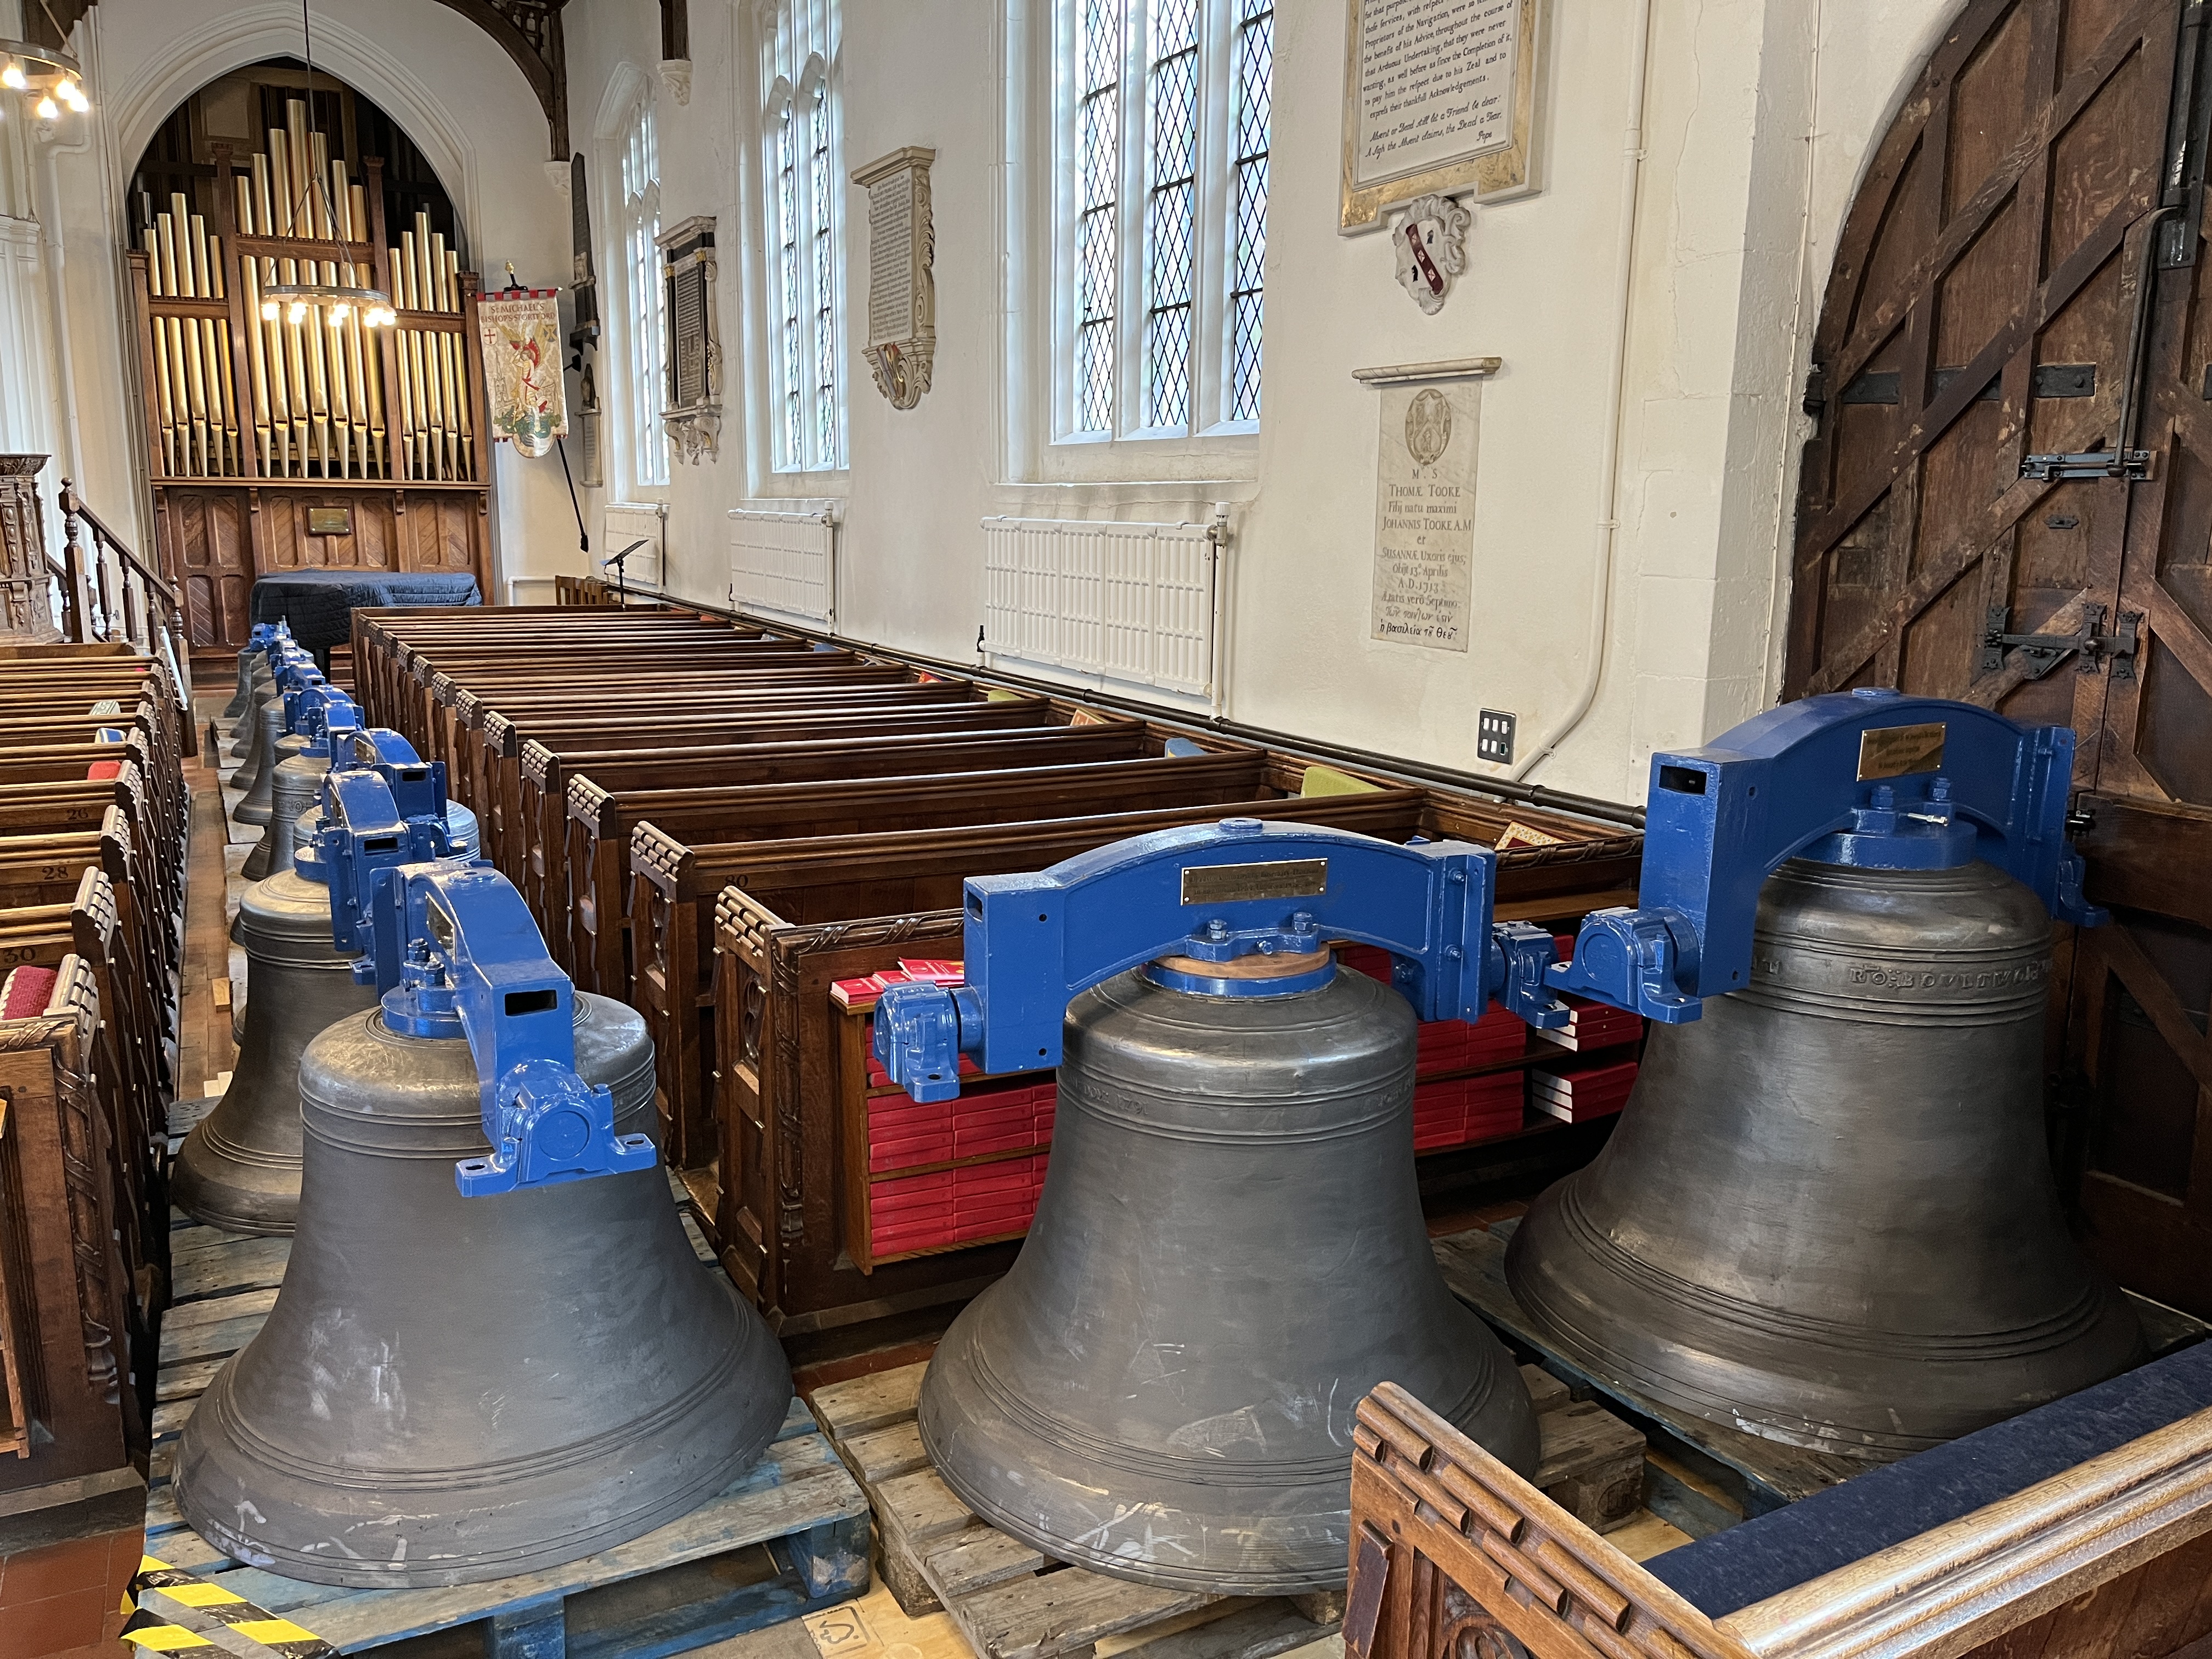 13 Bells in south aisle